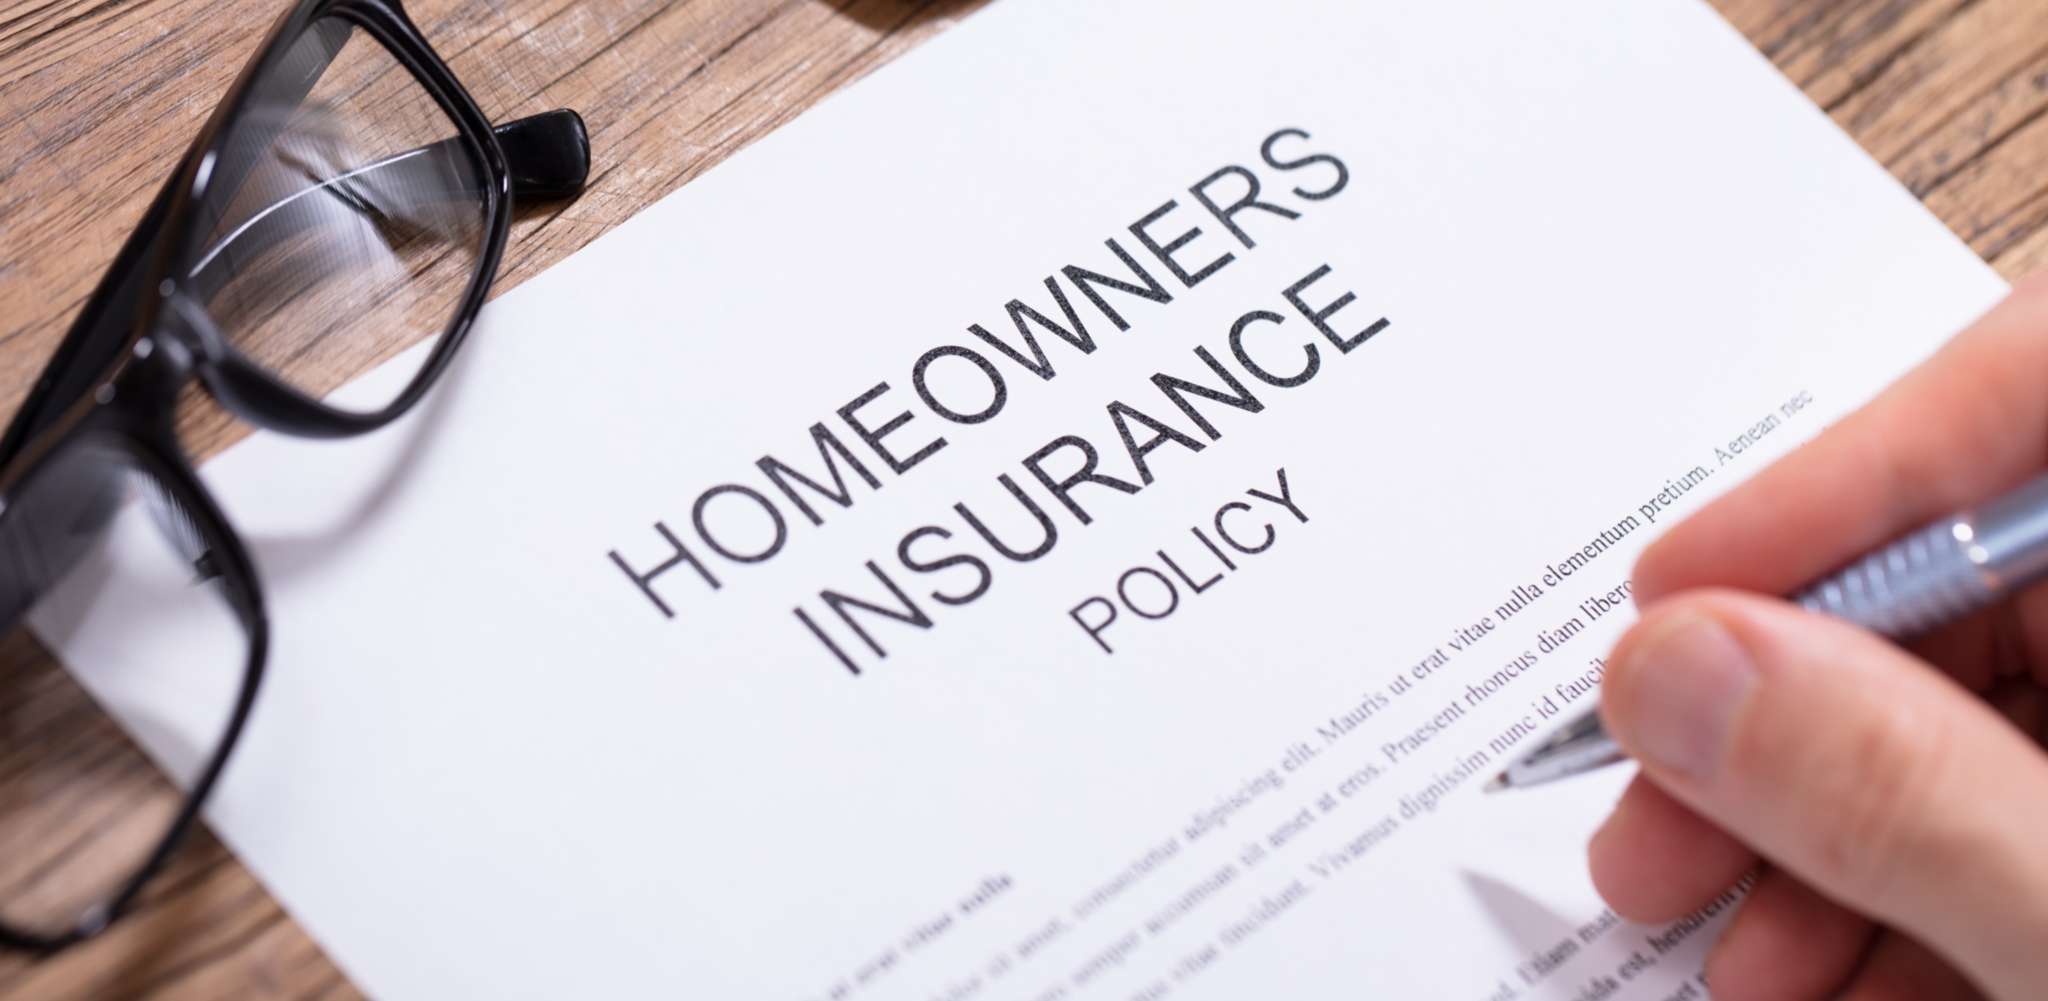 Home Insurance Offerings: Product Marketing vs Product Codes